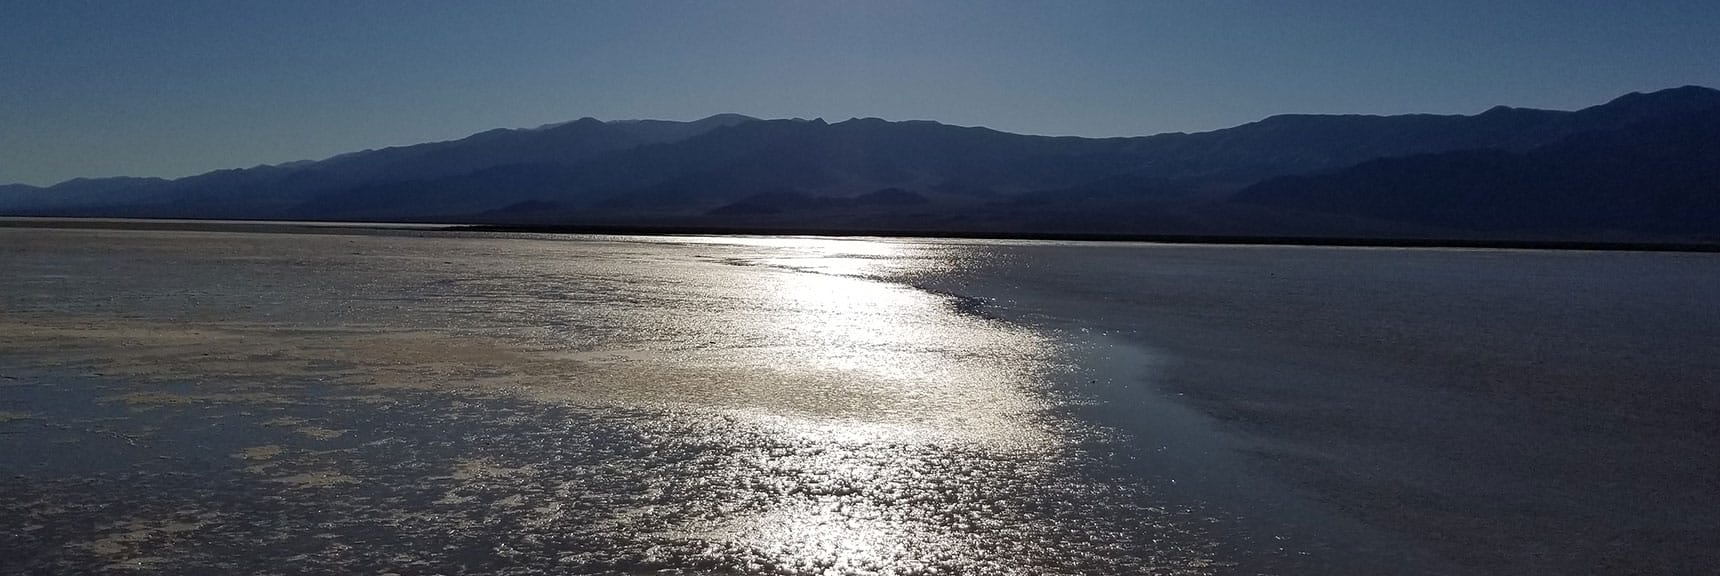 Looking Across the Lake Toward Telescope Peak and the Reflecting Sun. | Return of Lake Manly (Lake in Death Valley) | Death Valley National Park, California